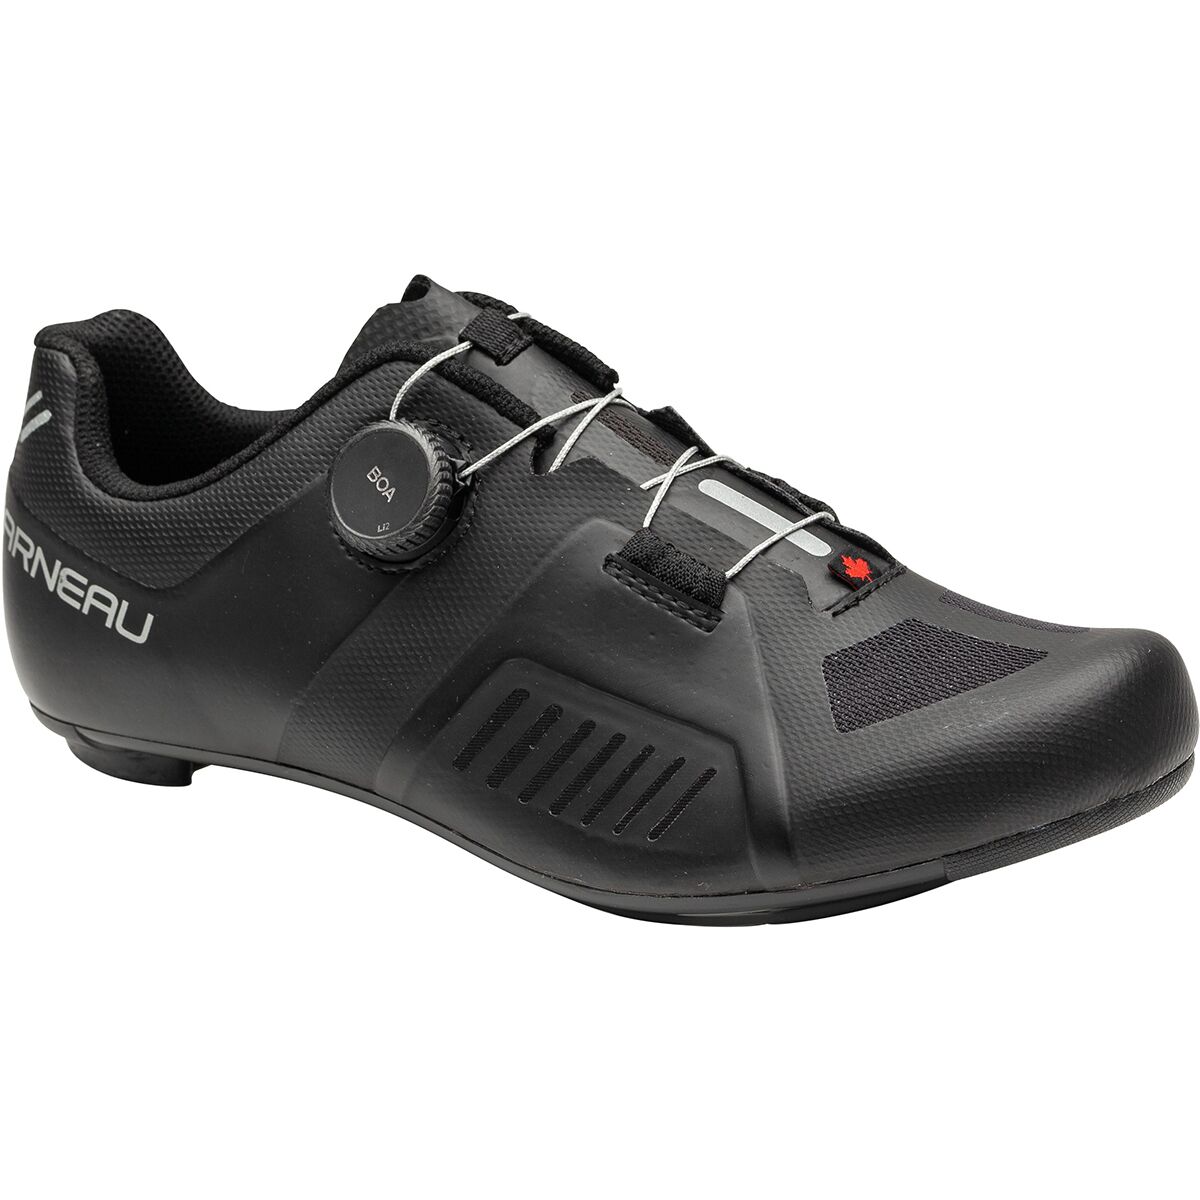 LOUIS GARNEAU MEN'S Revo XR3 Road Cycling Shoes Black/Red Size 45 **Pre  Owned** $49.95 - PicClick